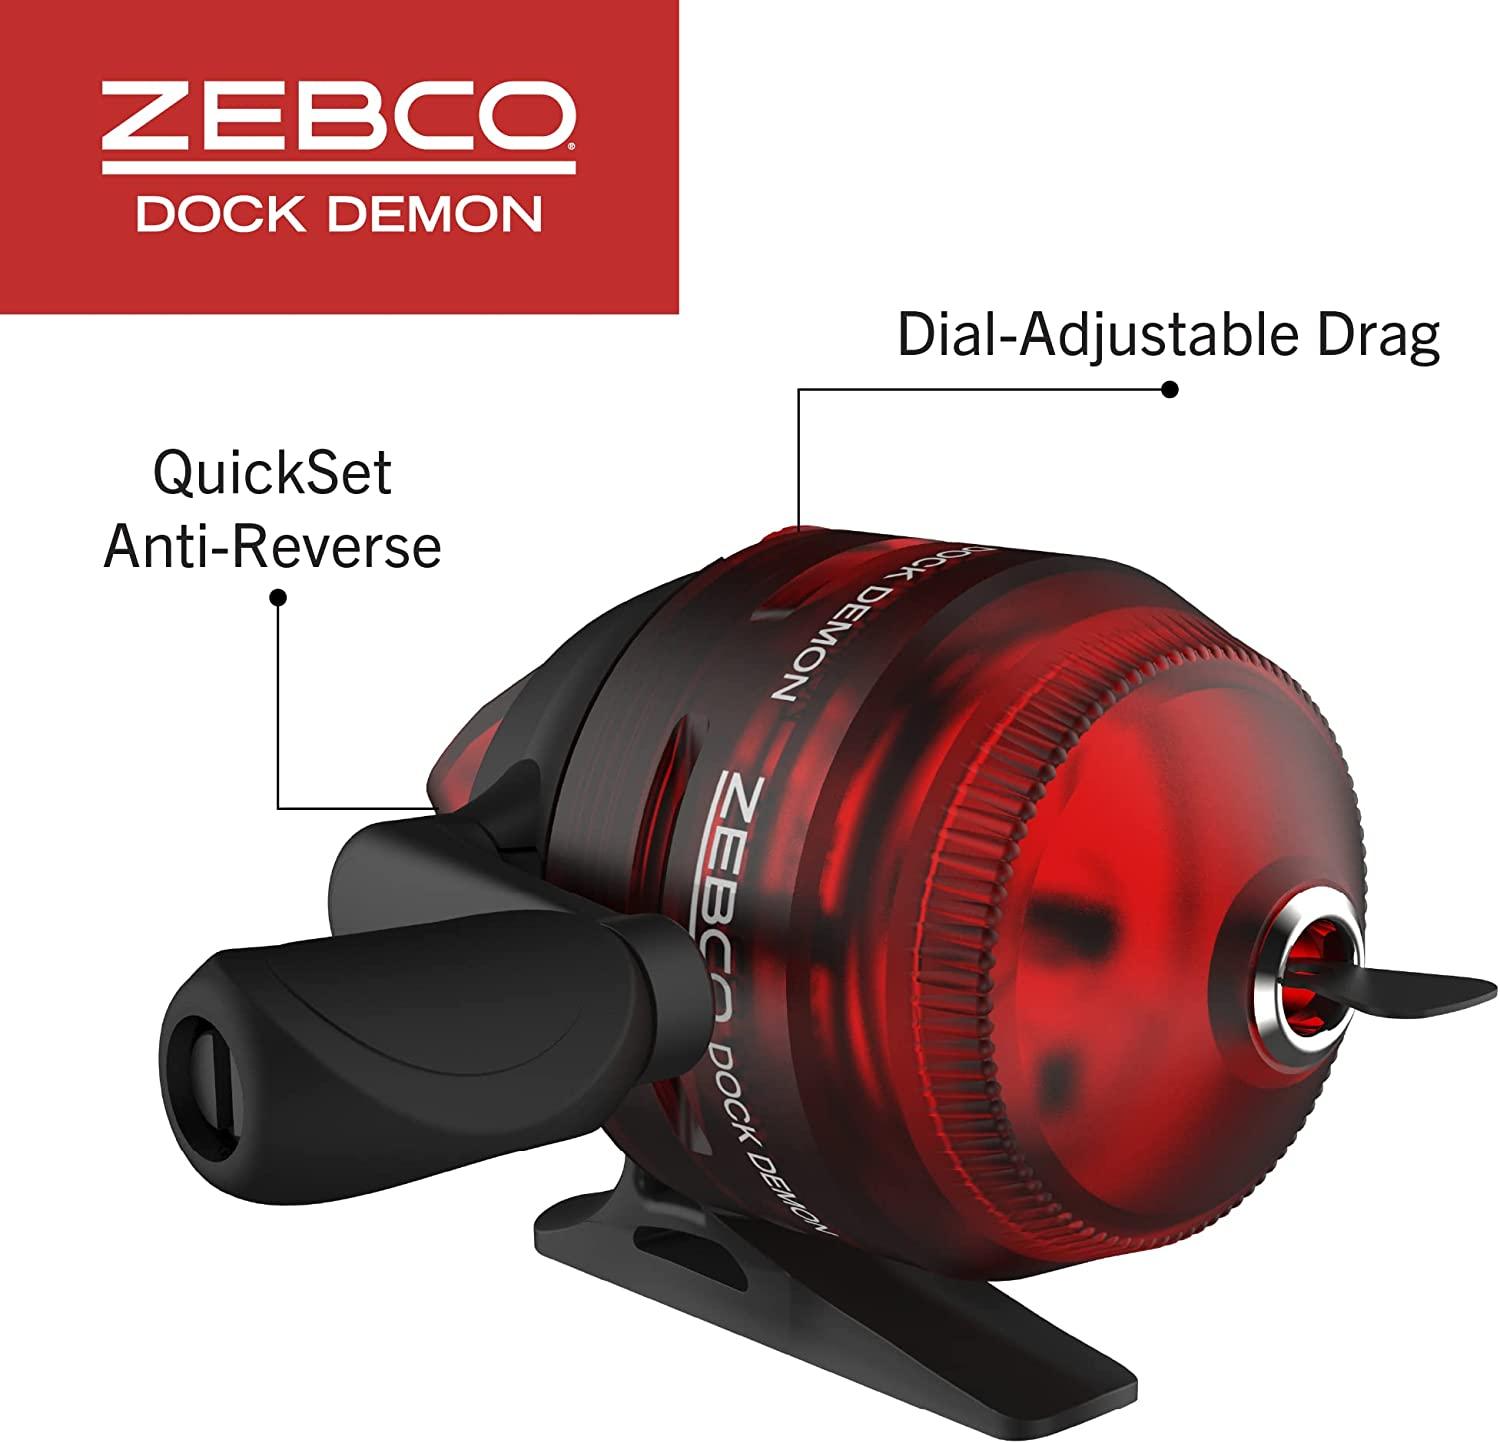 Zebco Dock Demon Spinning Reel or Spincast Reel and Fishing Rod Combo  30-Inch Durable Fiberglass Rod QuickSet Anti-Reverse Fishing Reel Spincast  Reel - Red